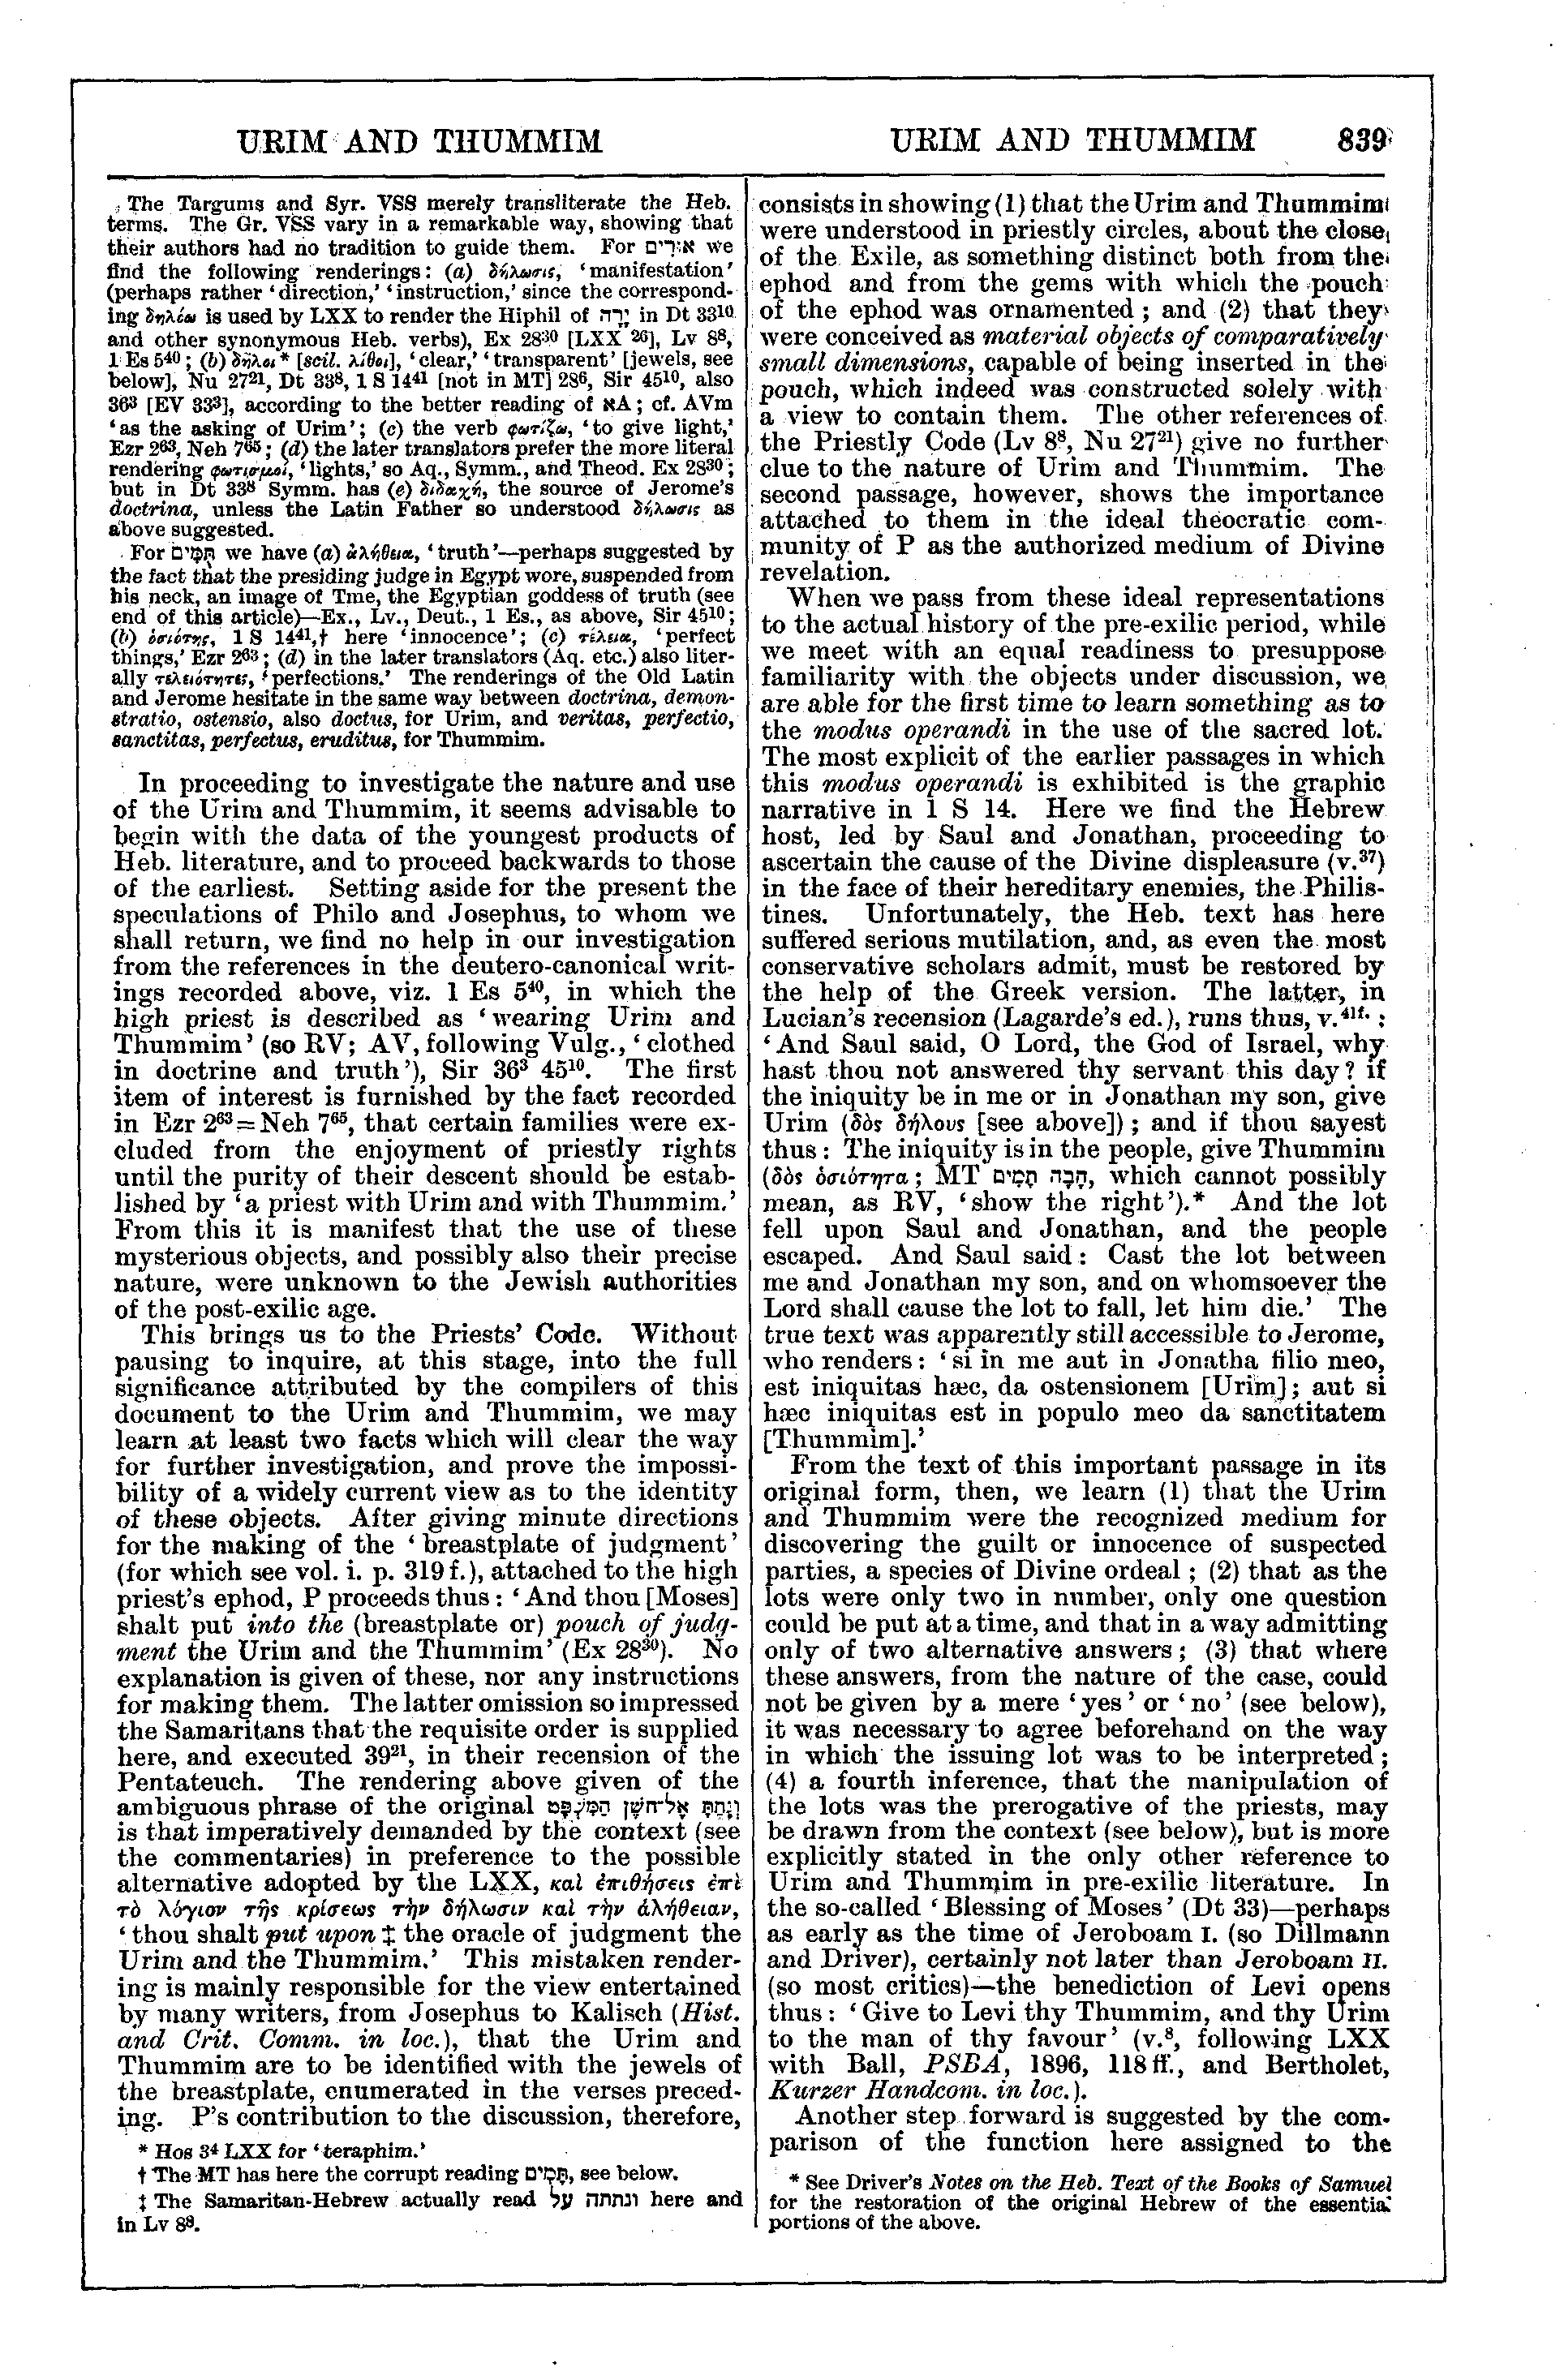 Image of page 839